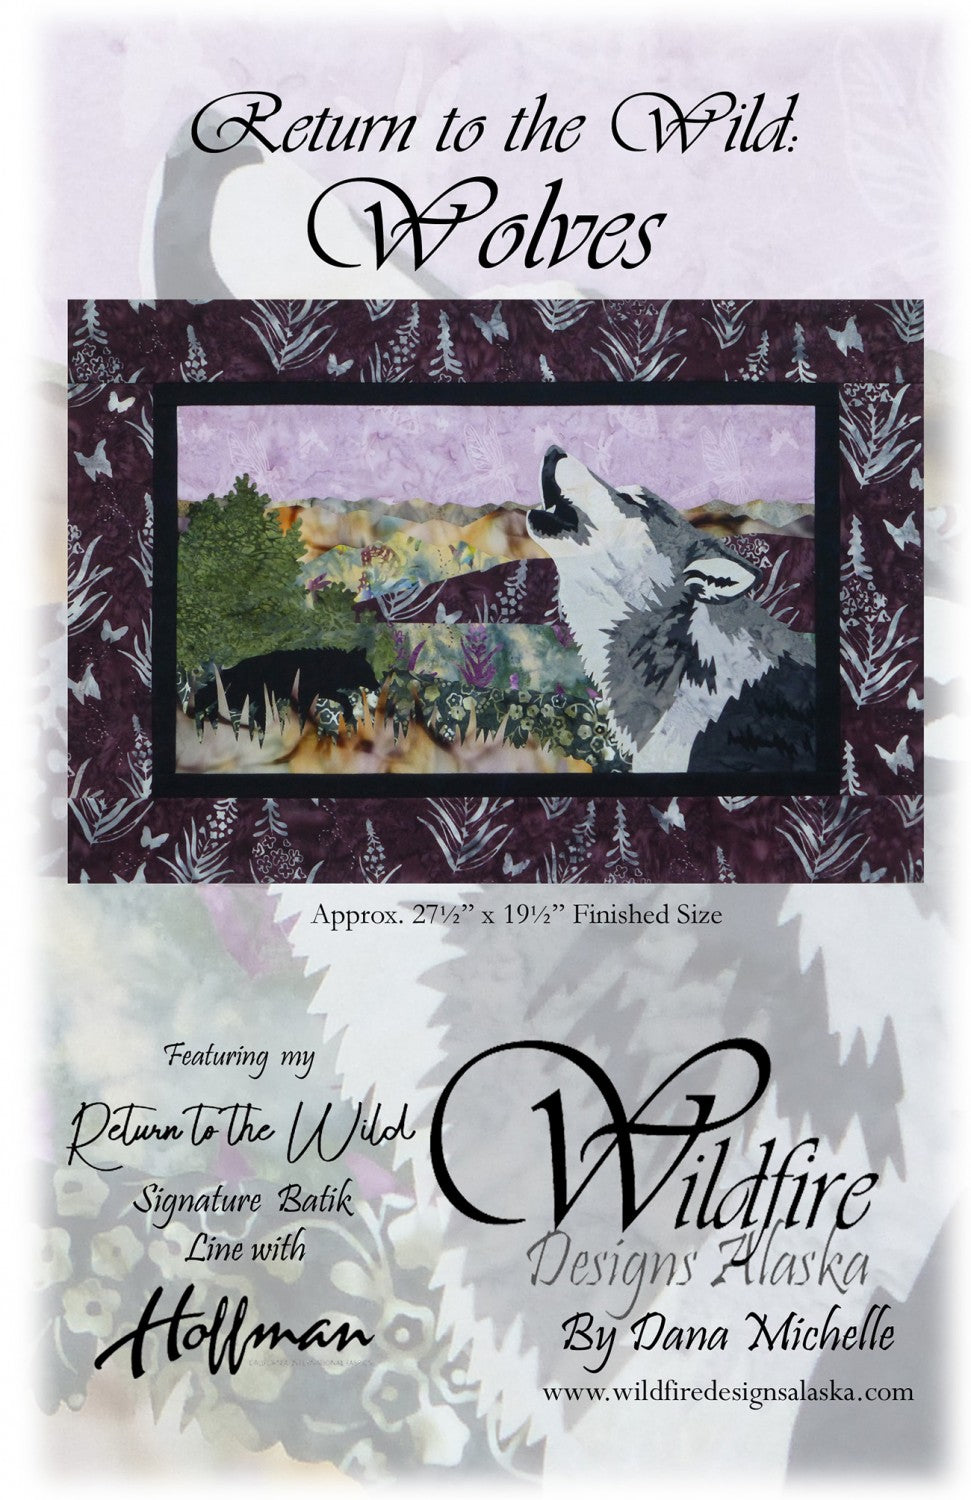 Wildfire Designs Alaska Return to the Wild Wolves Laser Cut Applique Kit Front Cover